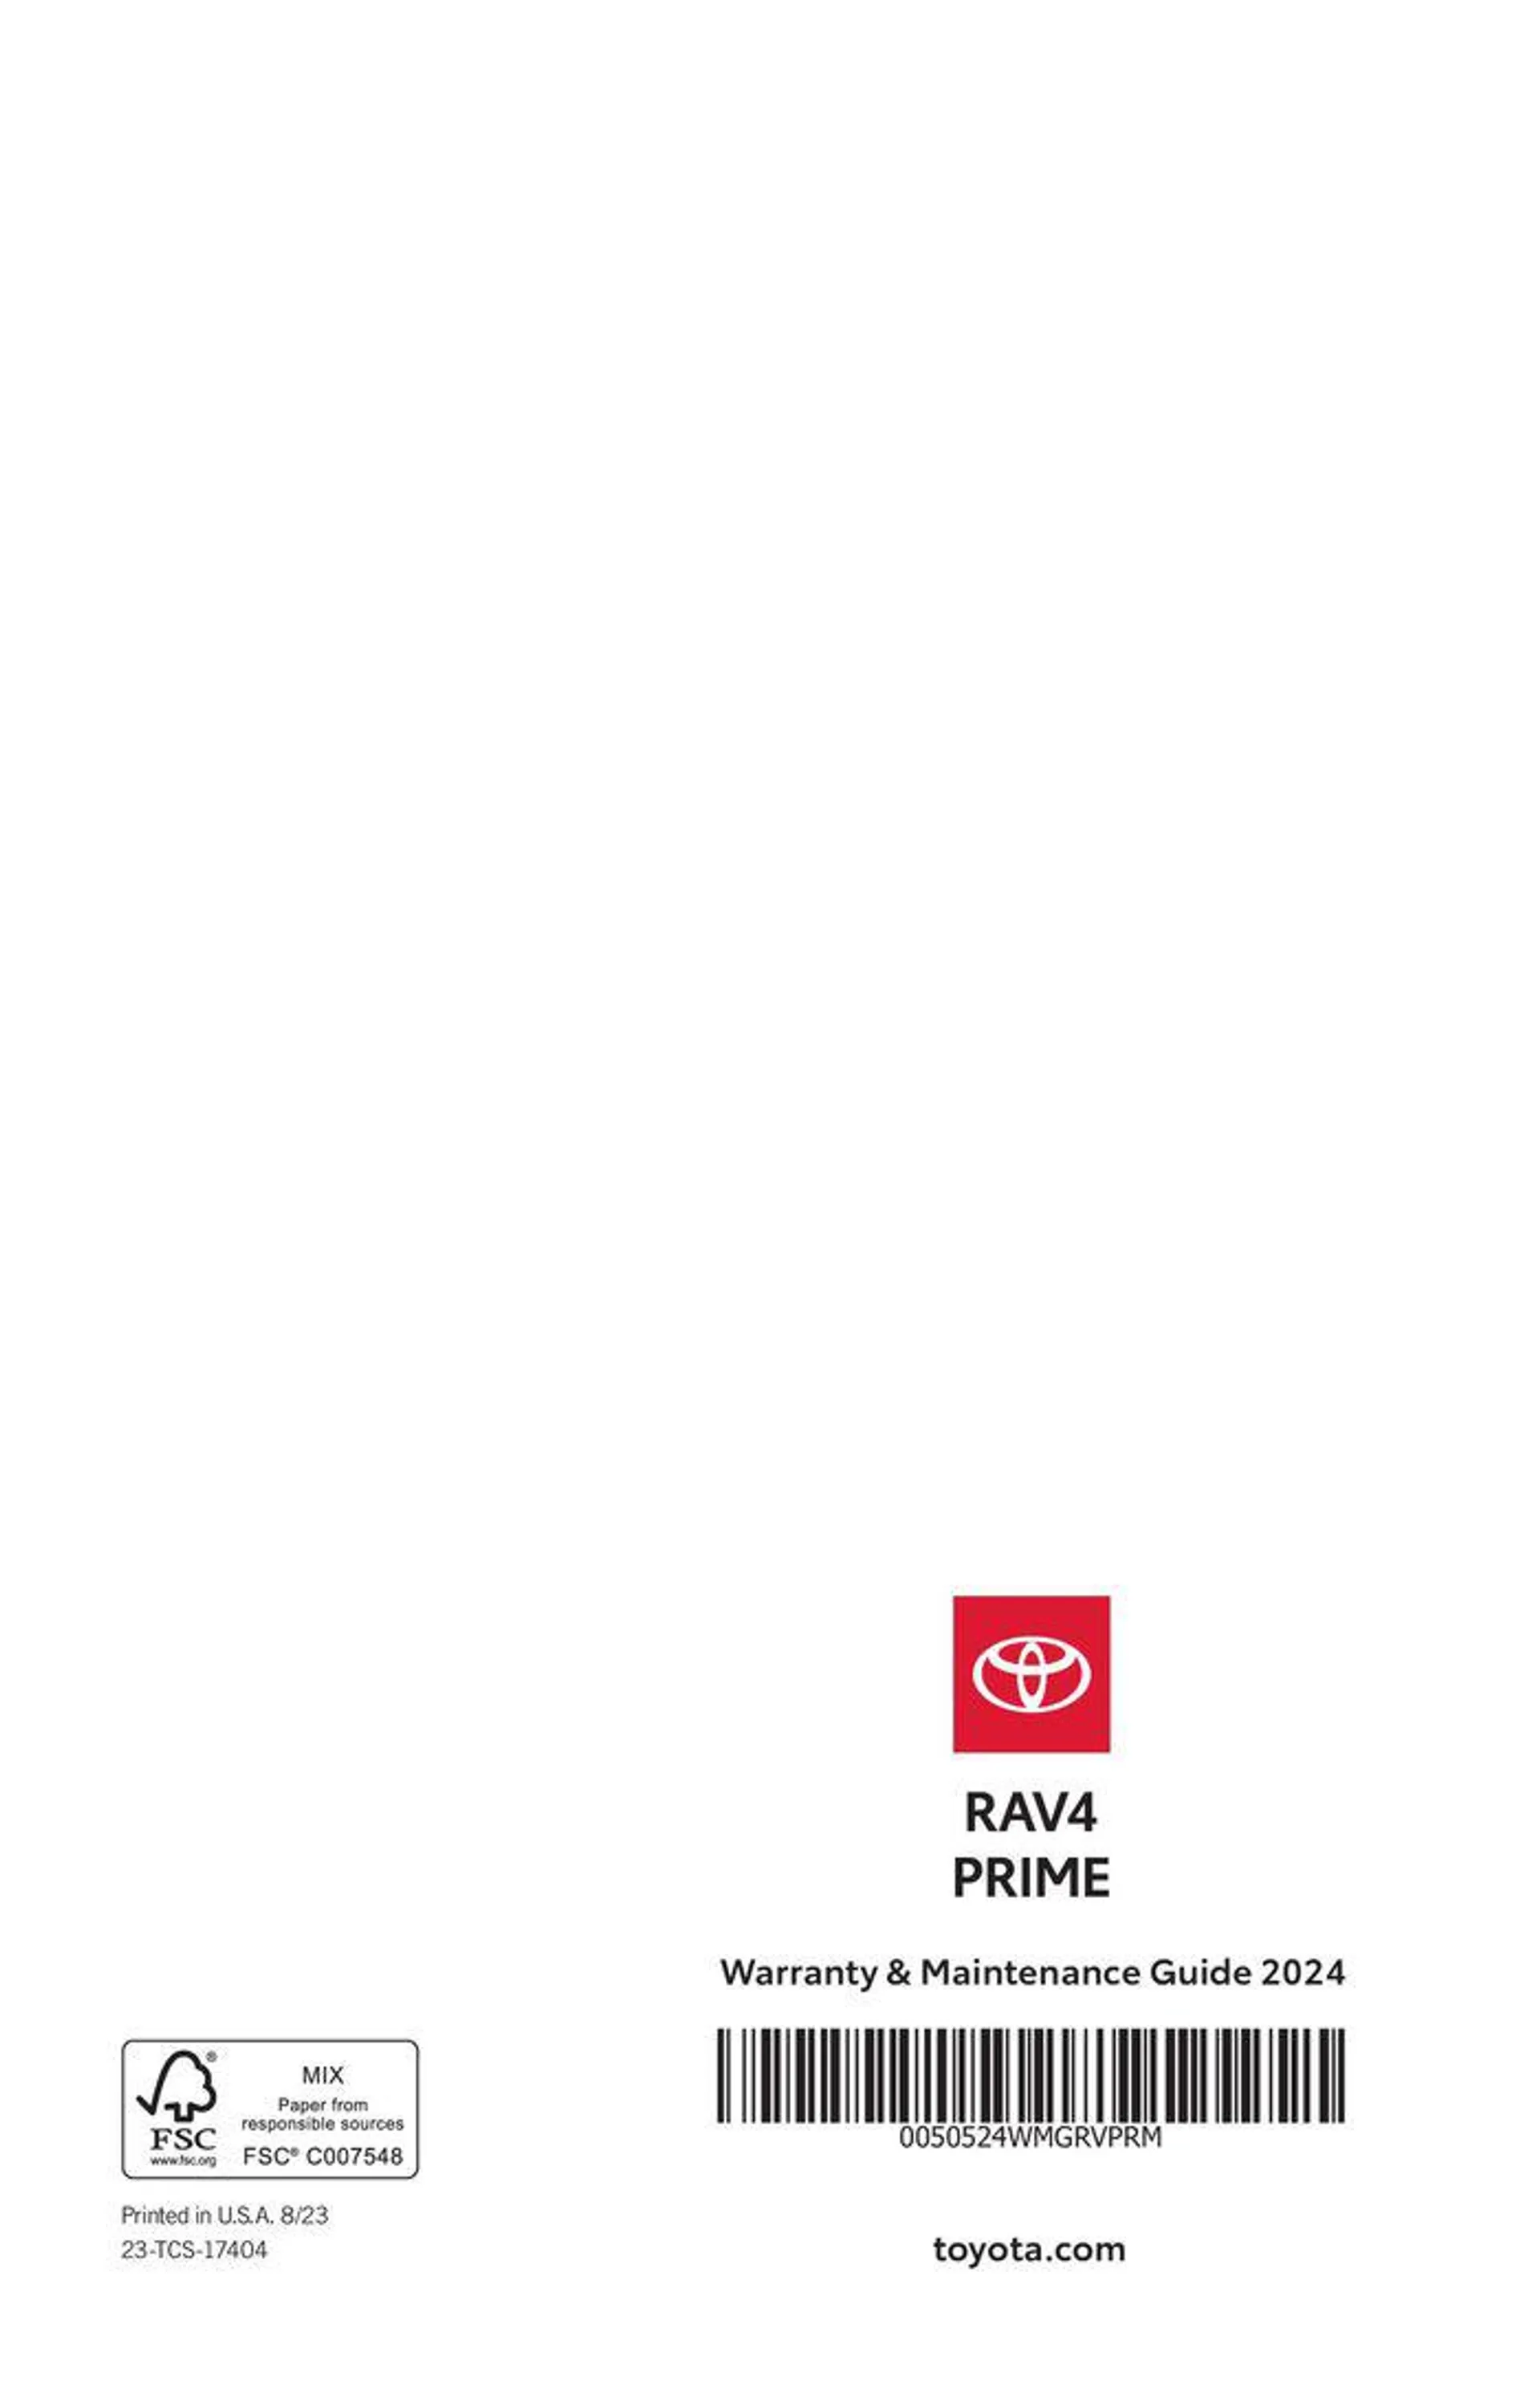 Weekly ad RAV4_Prime_2024 from March 6 to March 6 2025 - Page 68